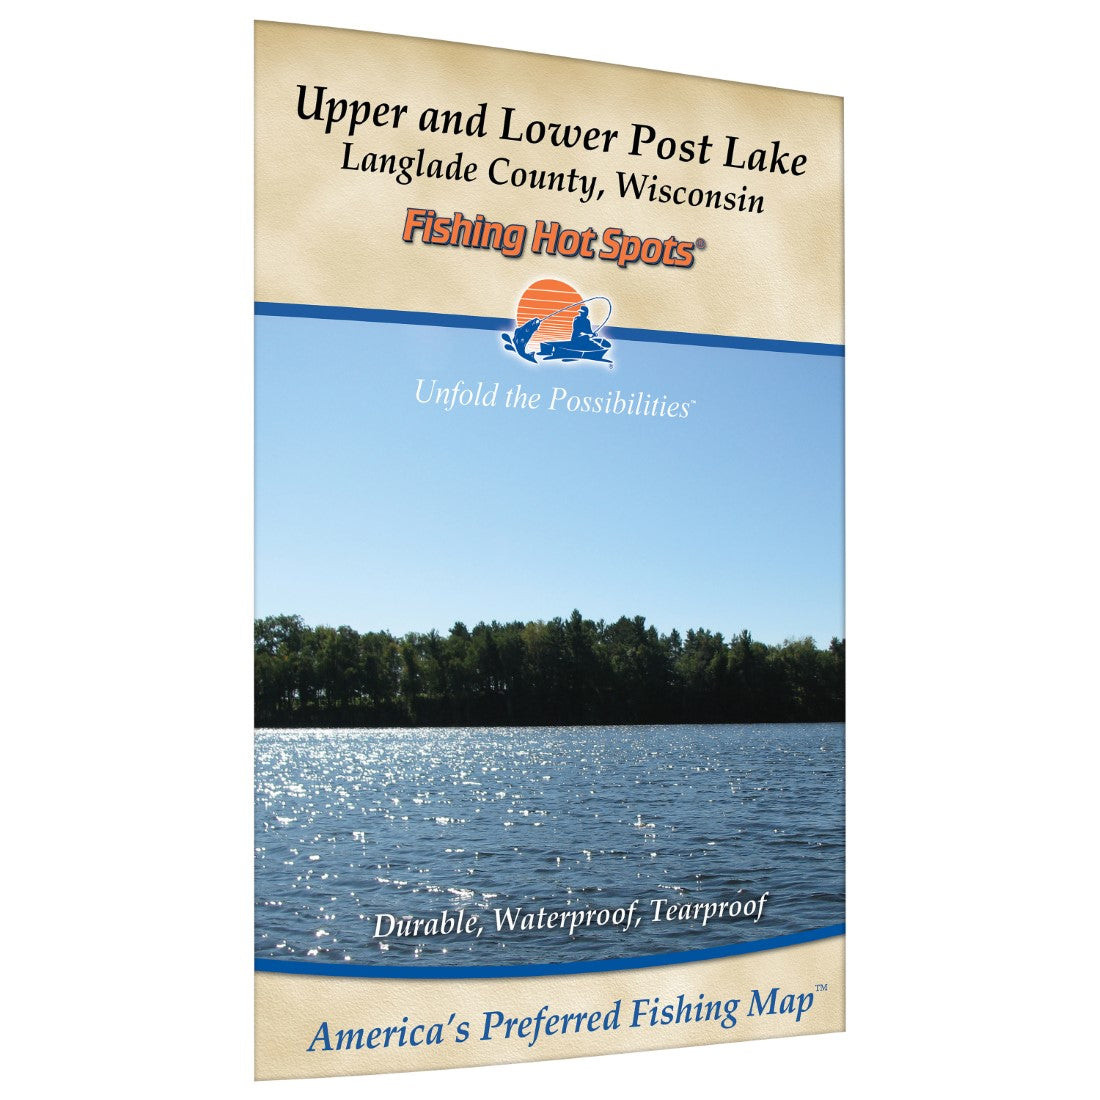 Post Lakes-Upper/Lower (Langlade Co) Fishing Map